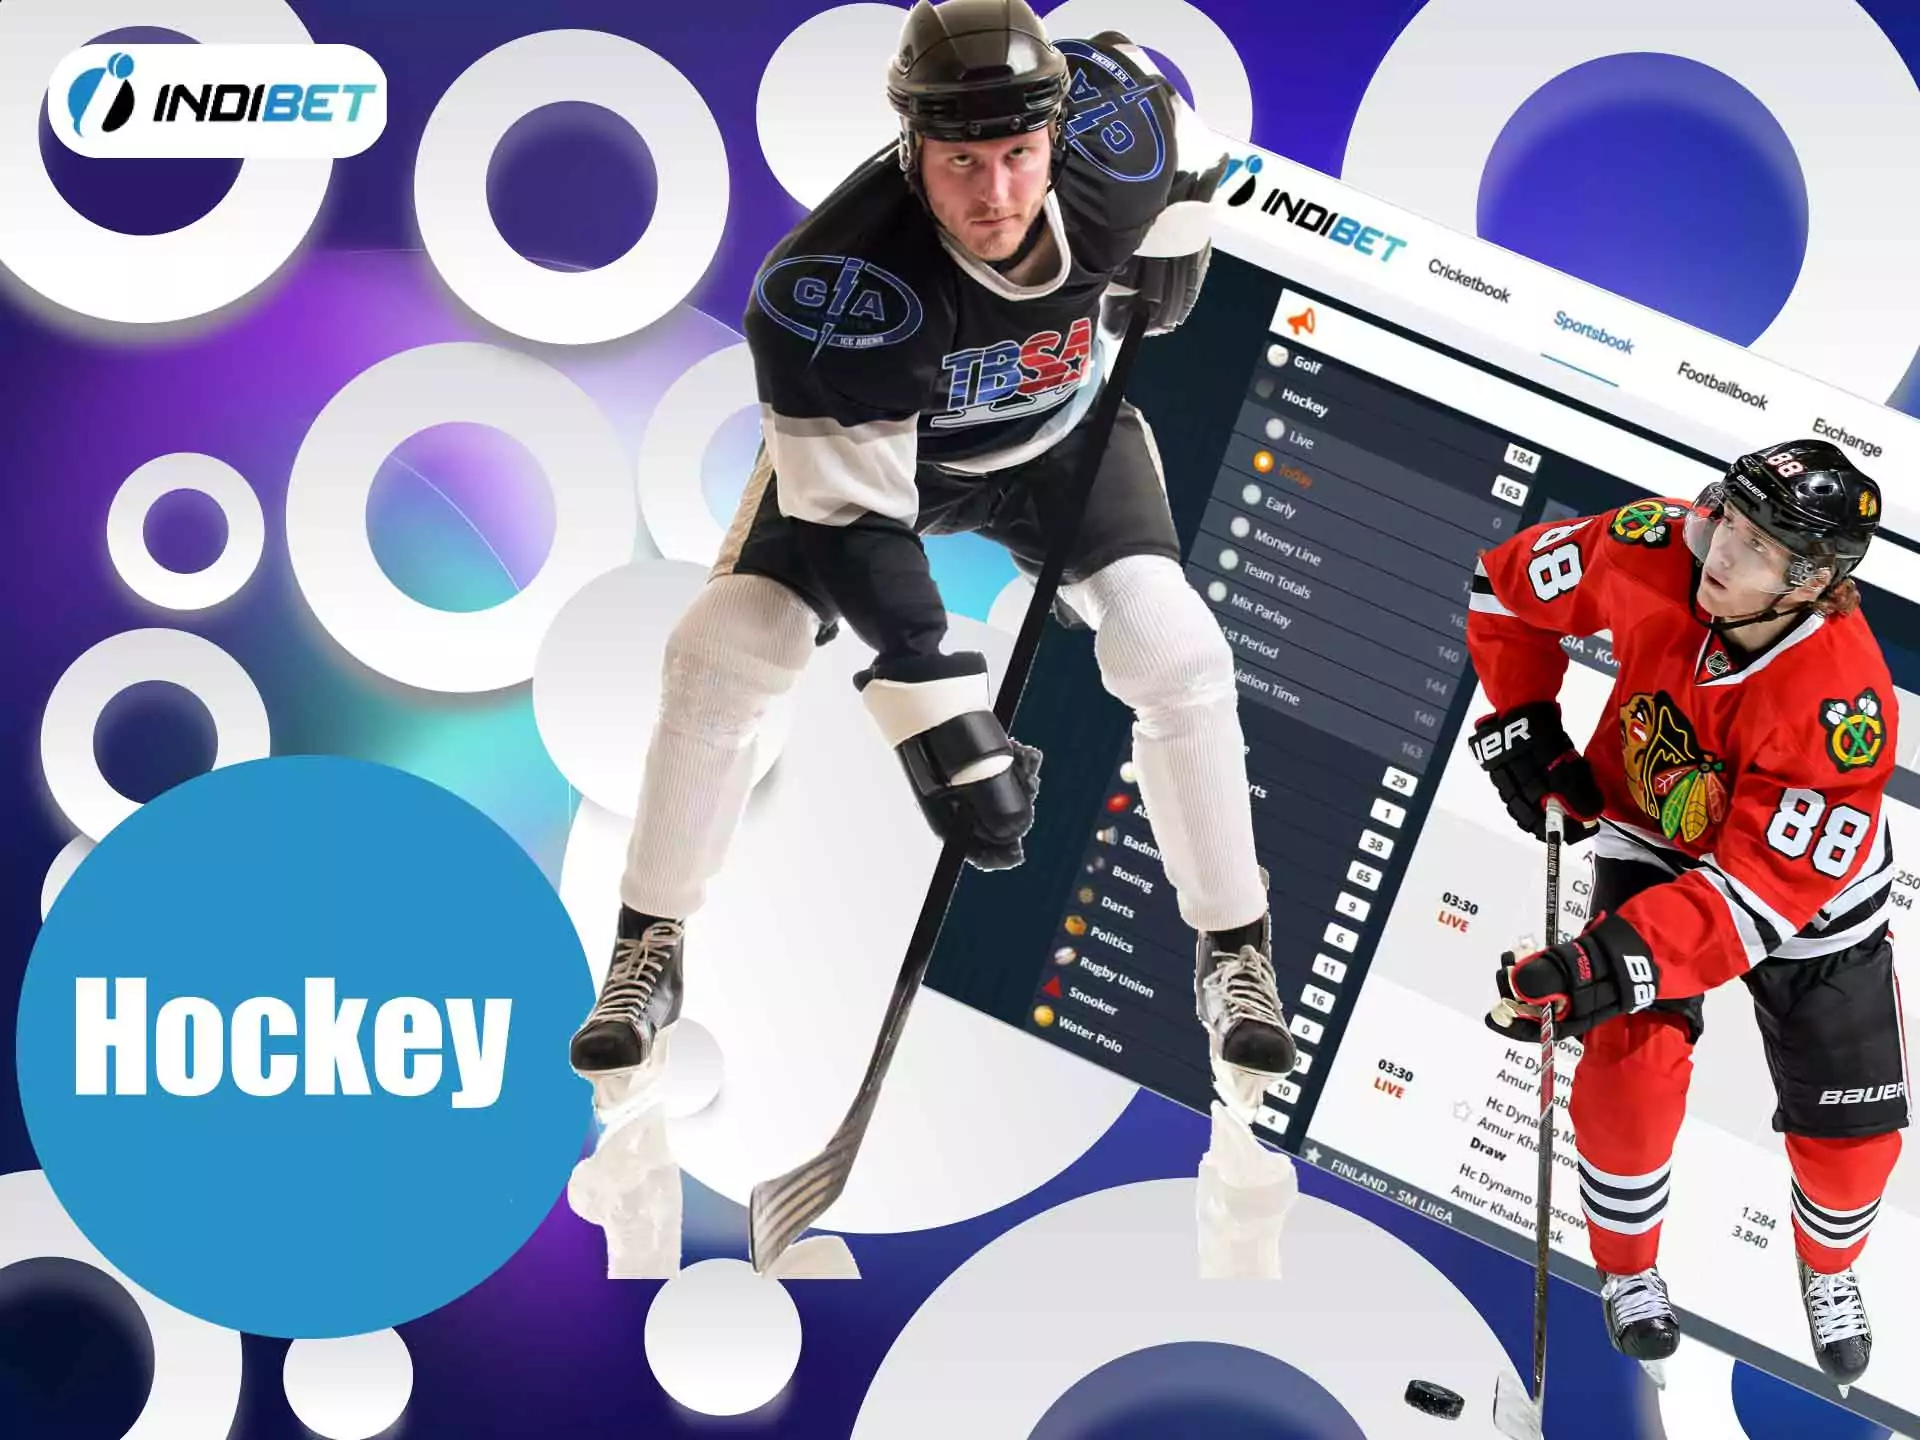 Choose your favorite hockey team and bet on it.